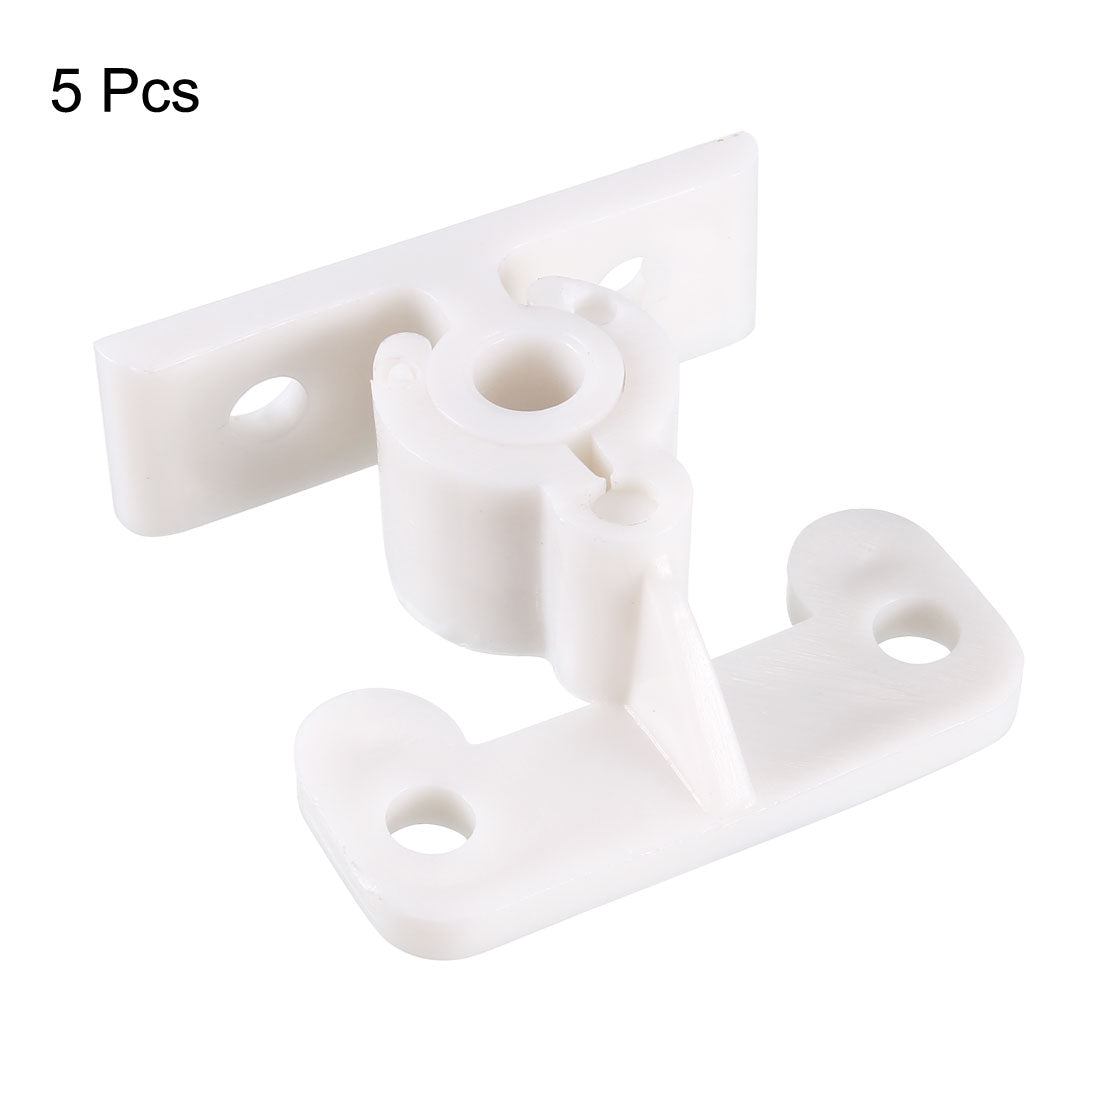 uxcell Uxcell Furniture Cabinet Door Plastic Friction Catch Non-Adjustable ABS Plastic White 5Pcs